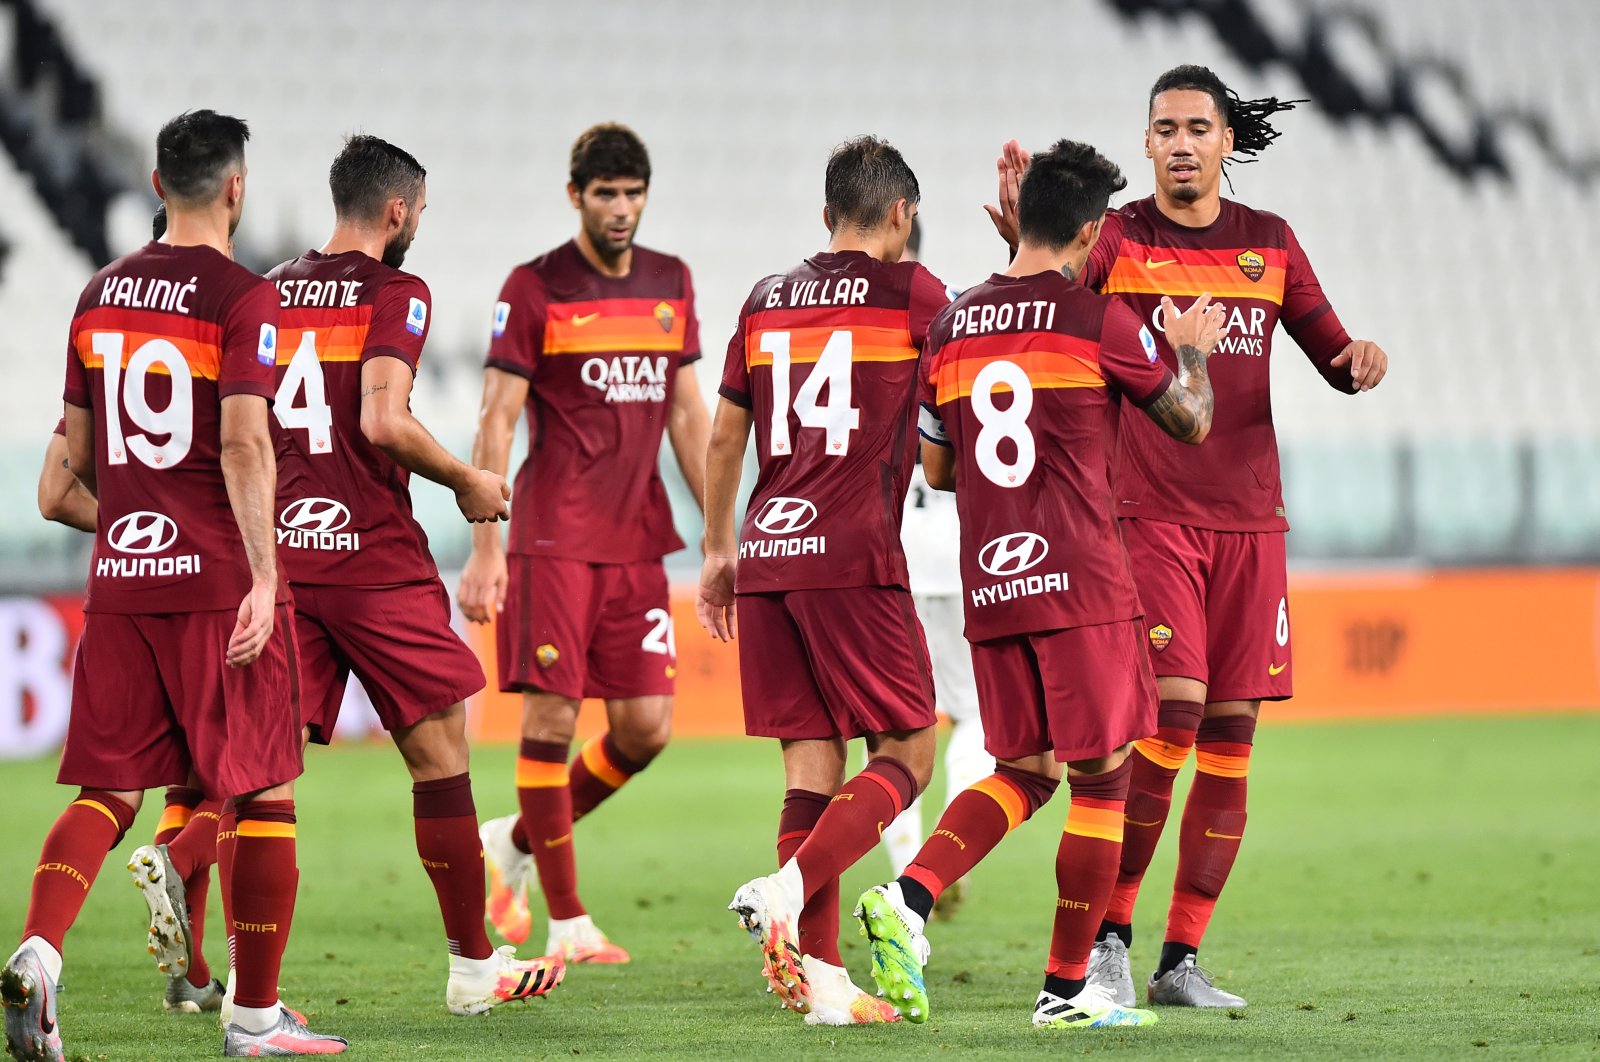 Serie A club Roma sold to US billionaire for $700 million - Daily Sabah